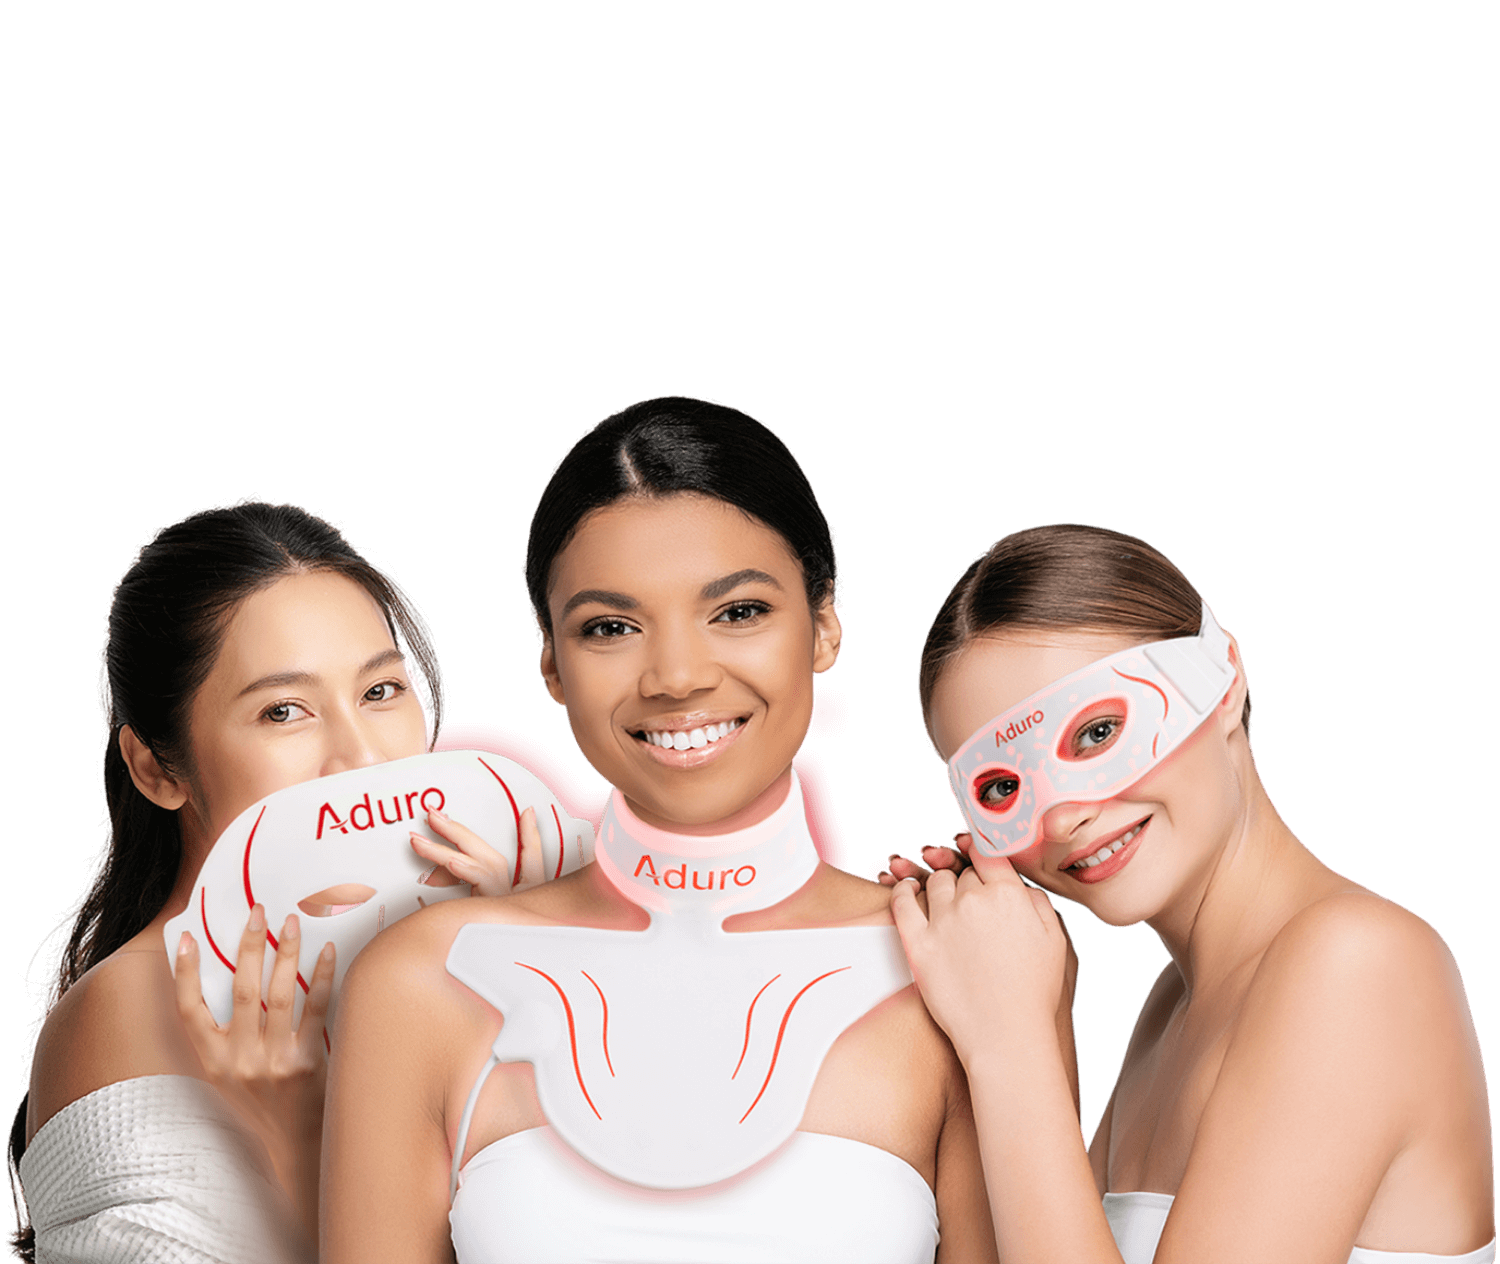 Aduro offers fda approved led face mask